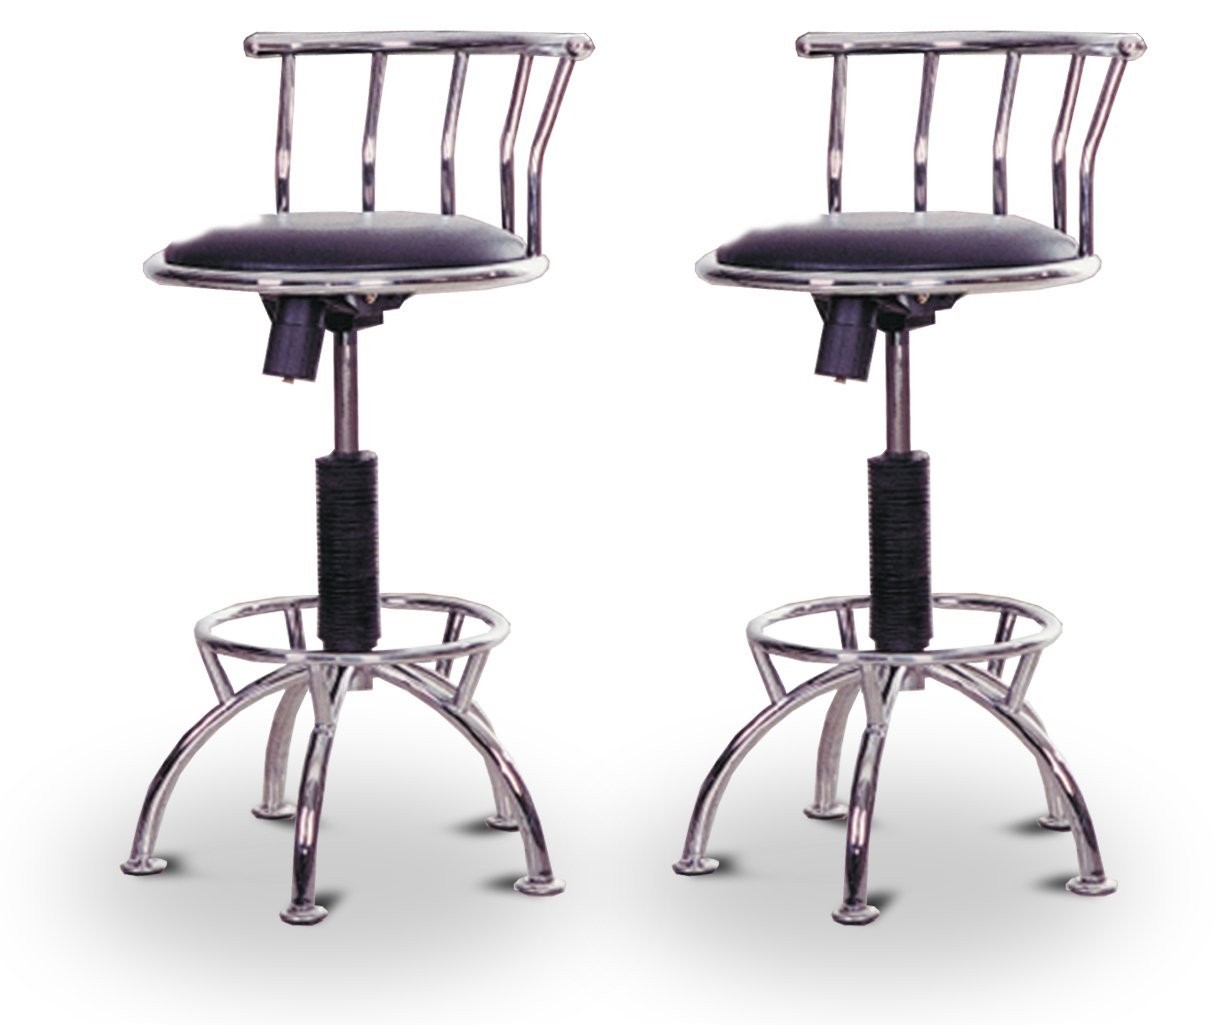 Commercial wooden bar stools